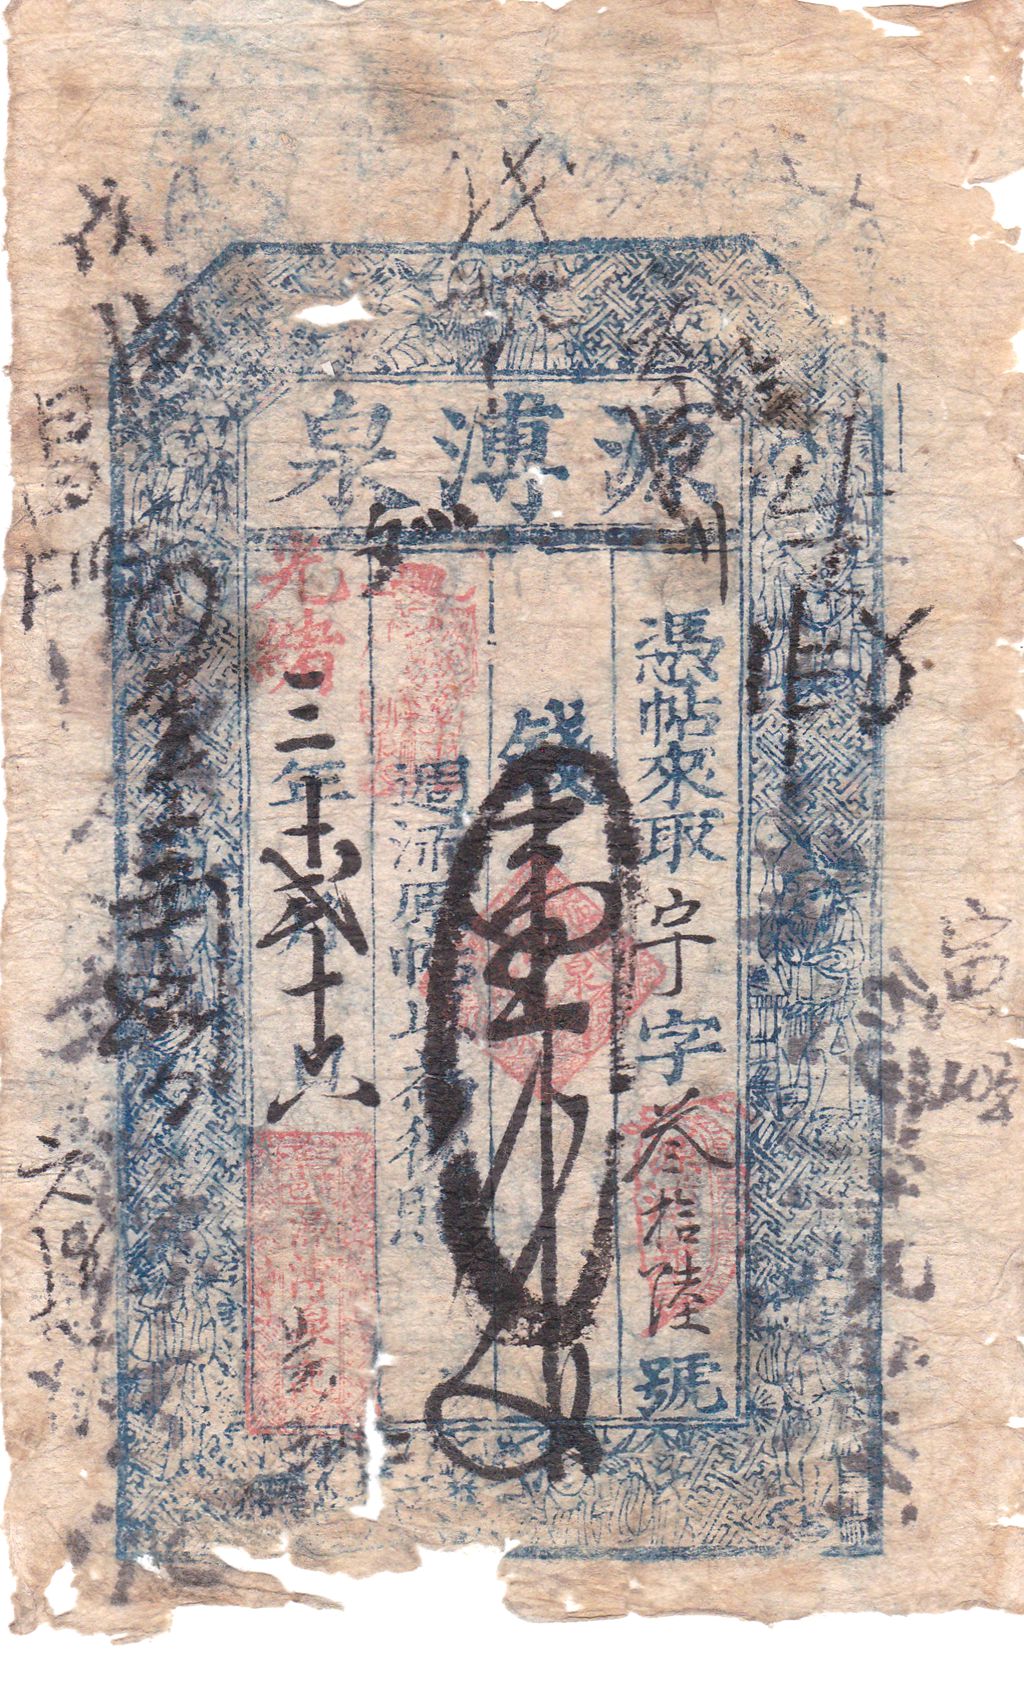 N6050, China Local Banknote (Native Bank Order), Ding County 1000 Cash, 1877